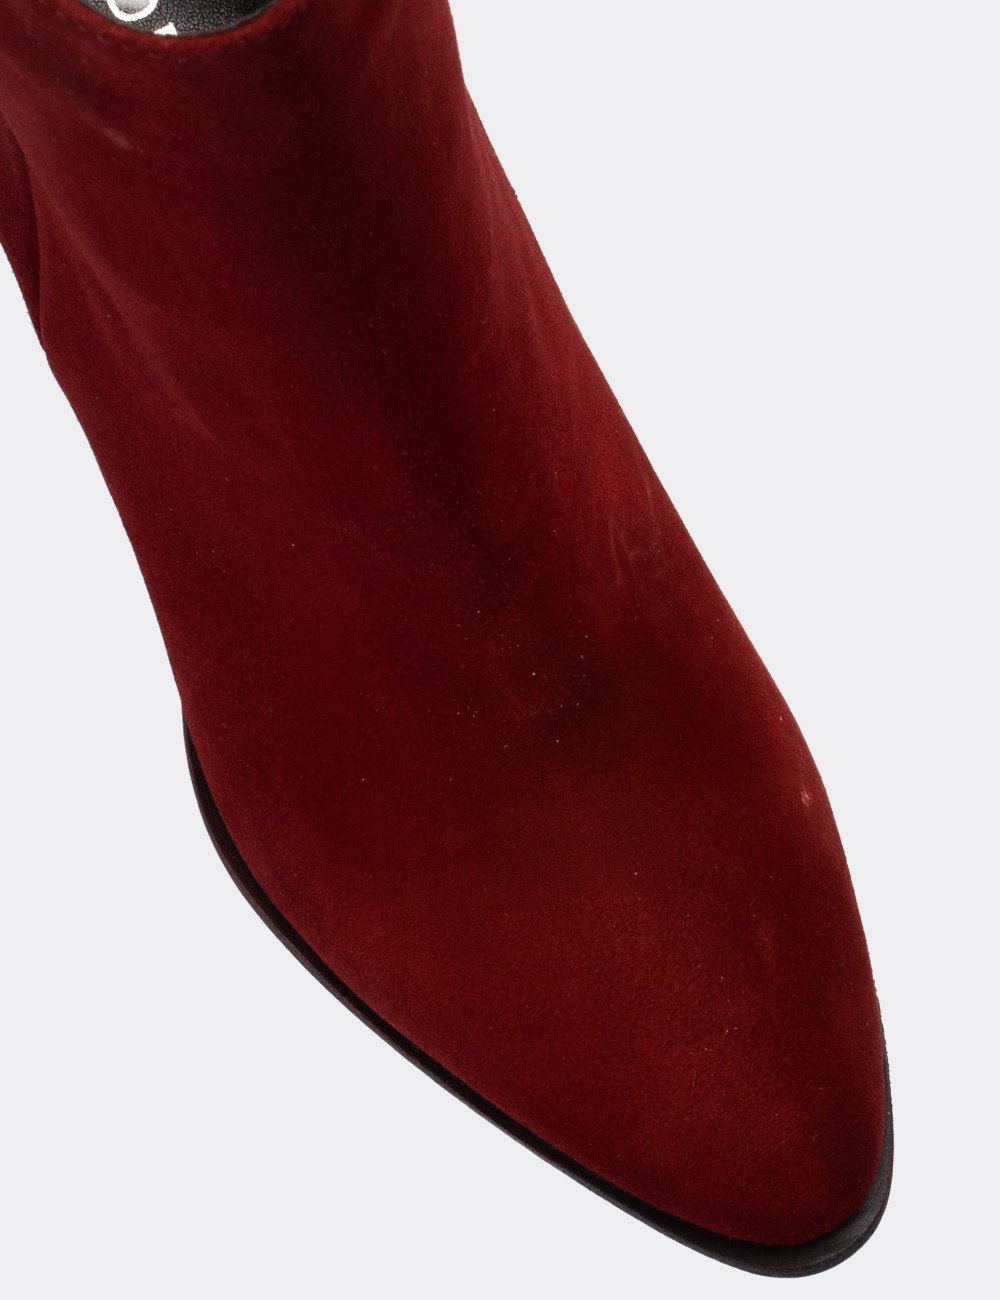 Burgundy Suede Leather Boots - E4452ZBRDC01